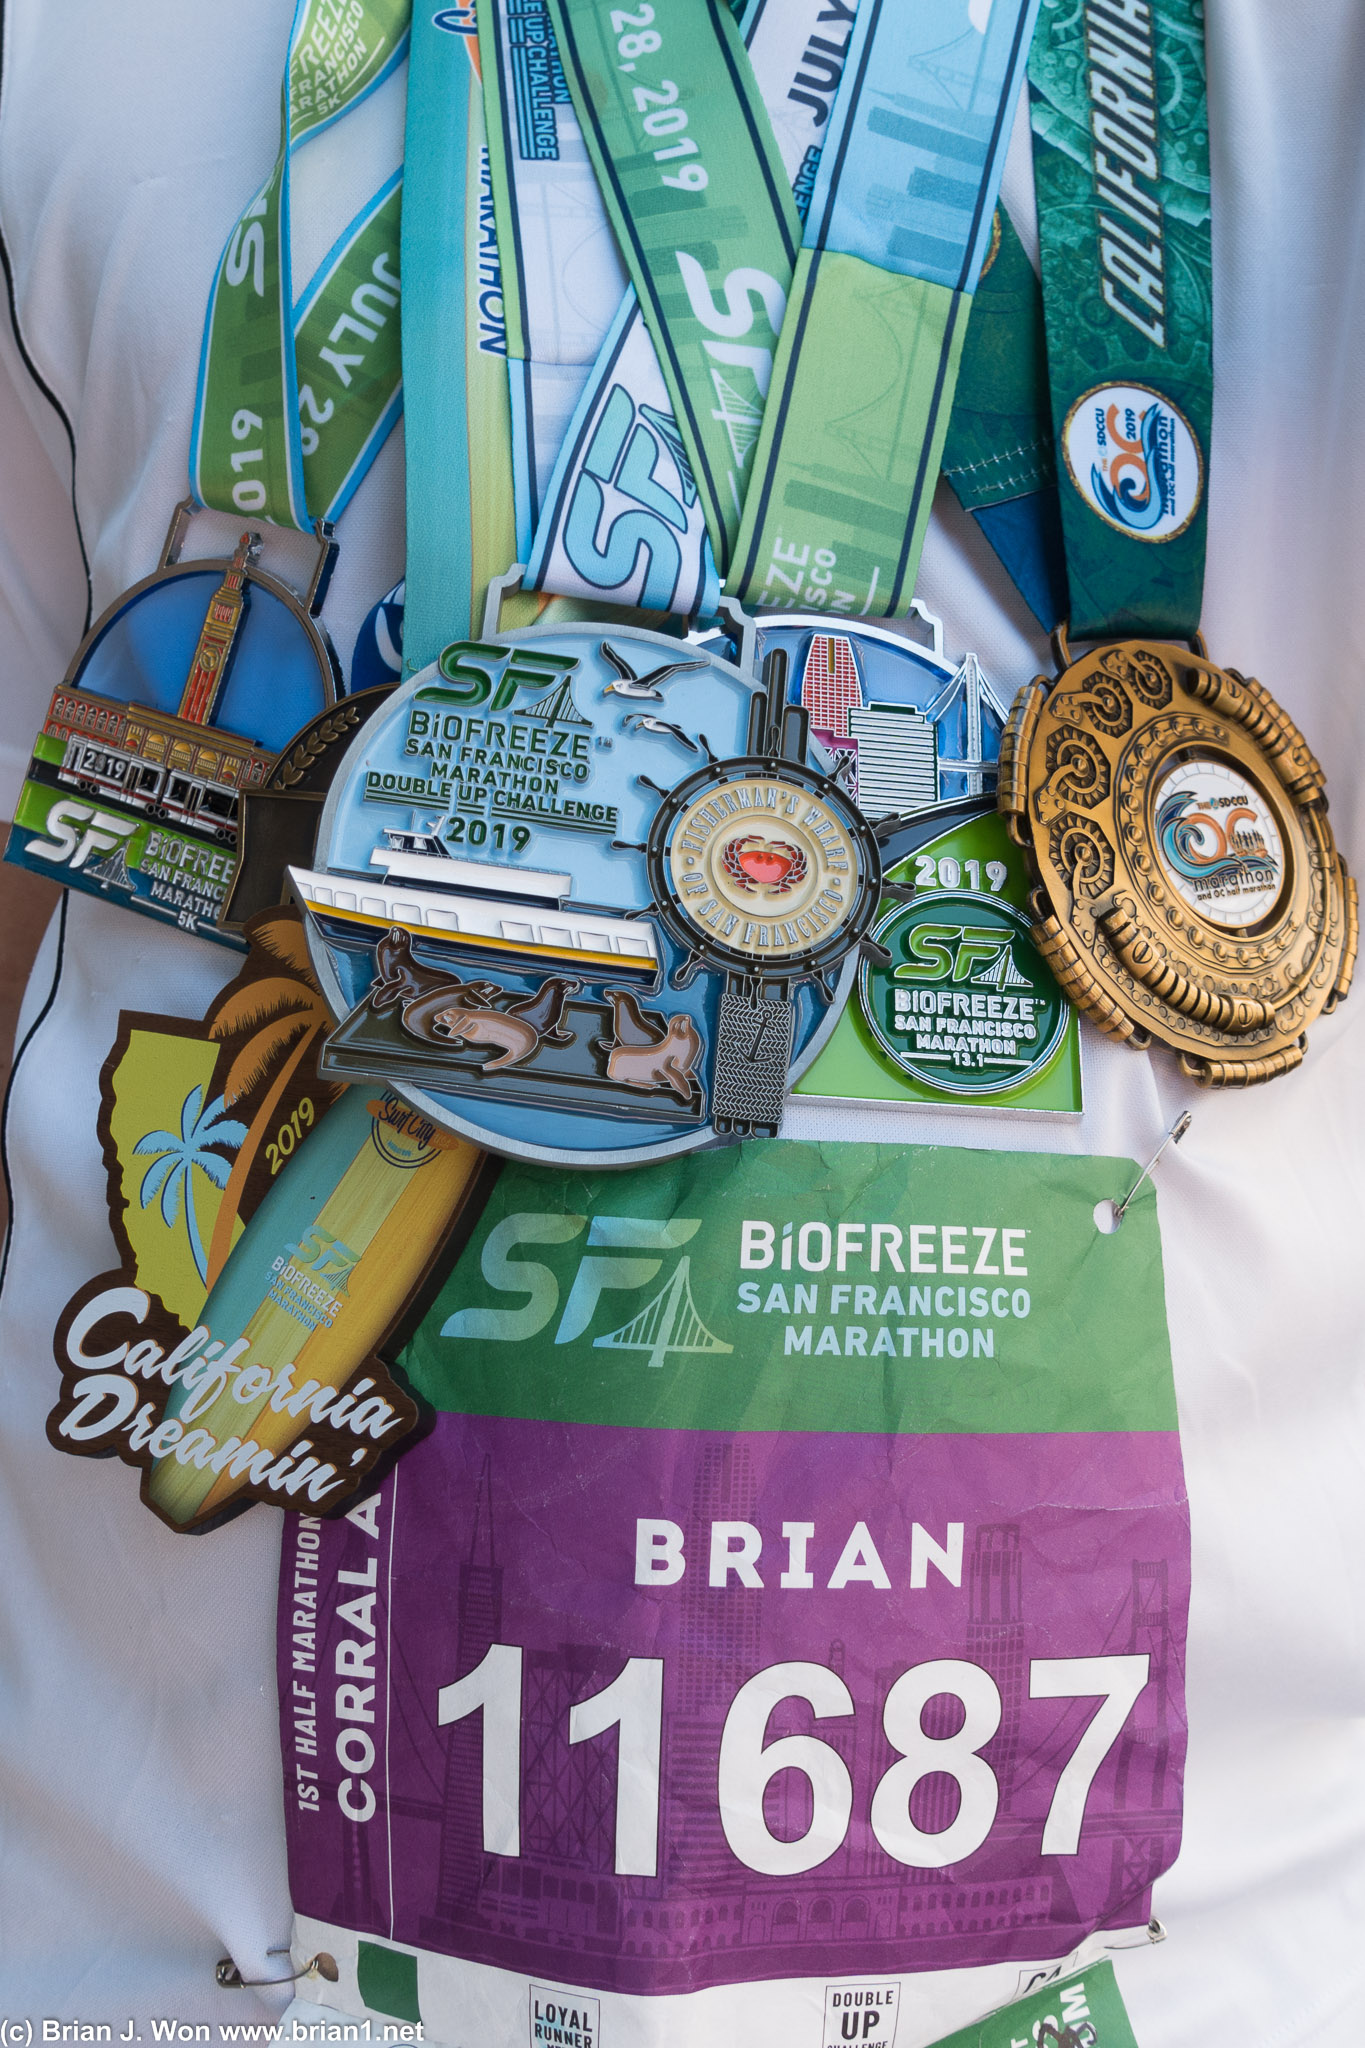 Run 2 races this weekend, get 6 medals?!?